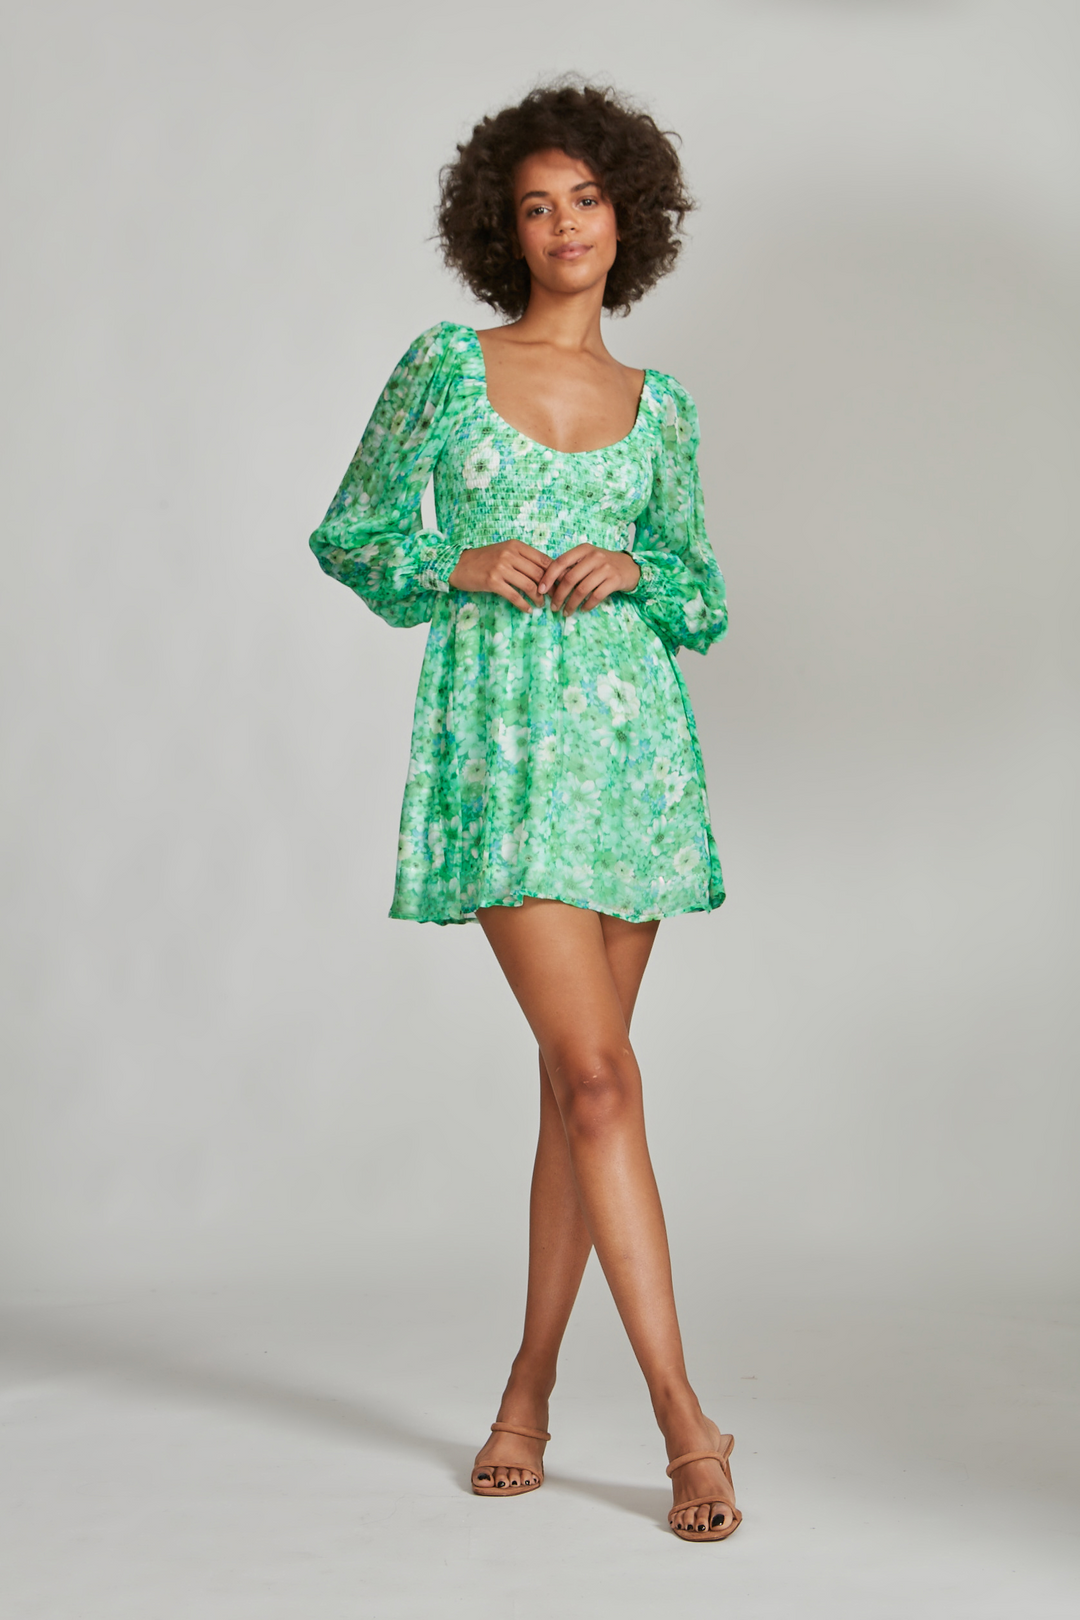 COLOR ME LUCKY DRESS - Kingfisher Road - Online Boutique